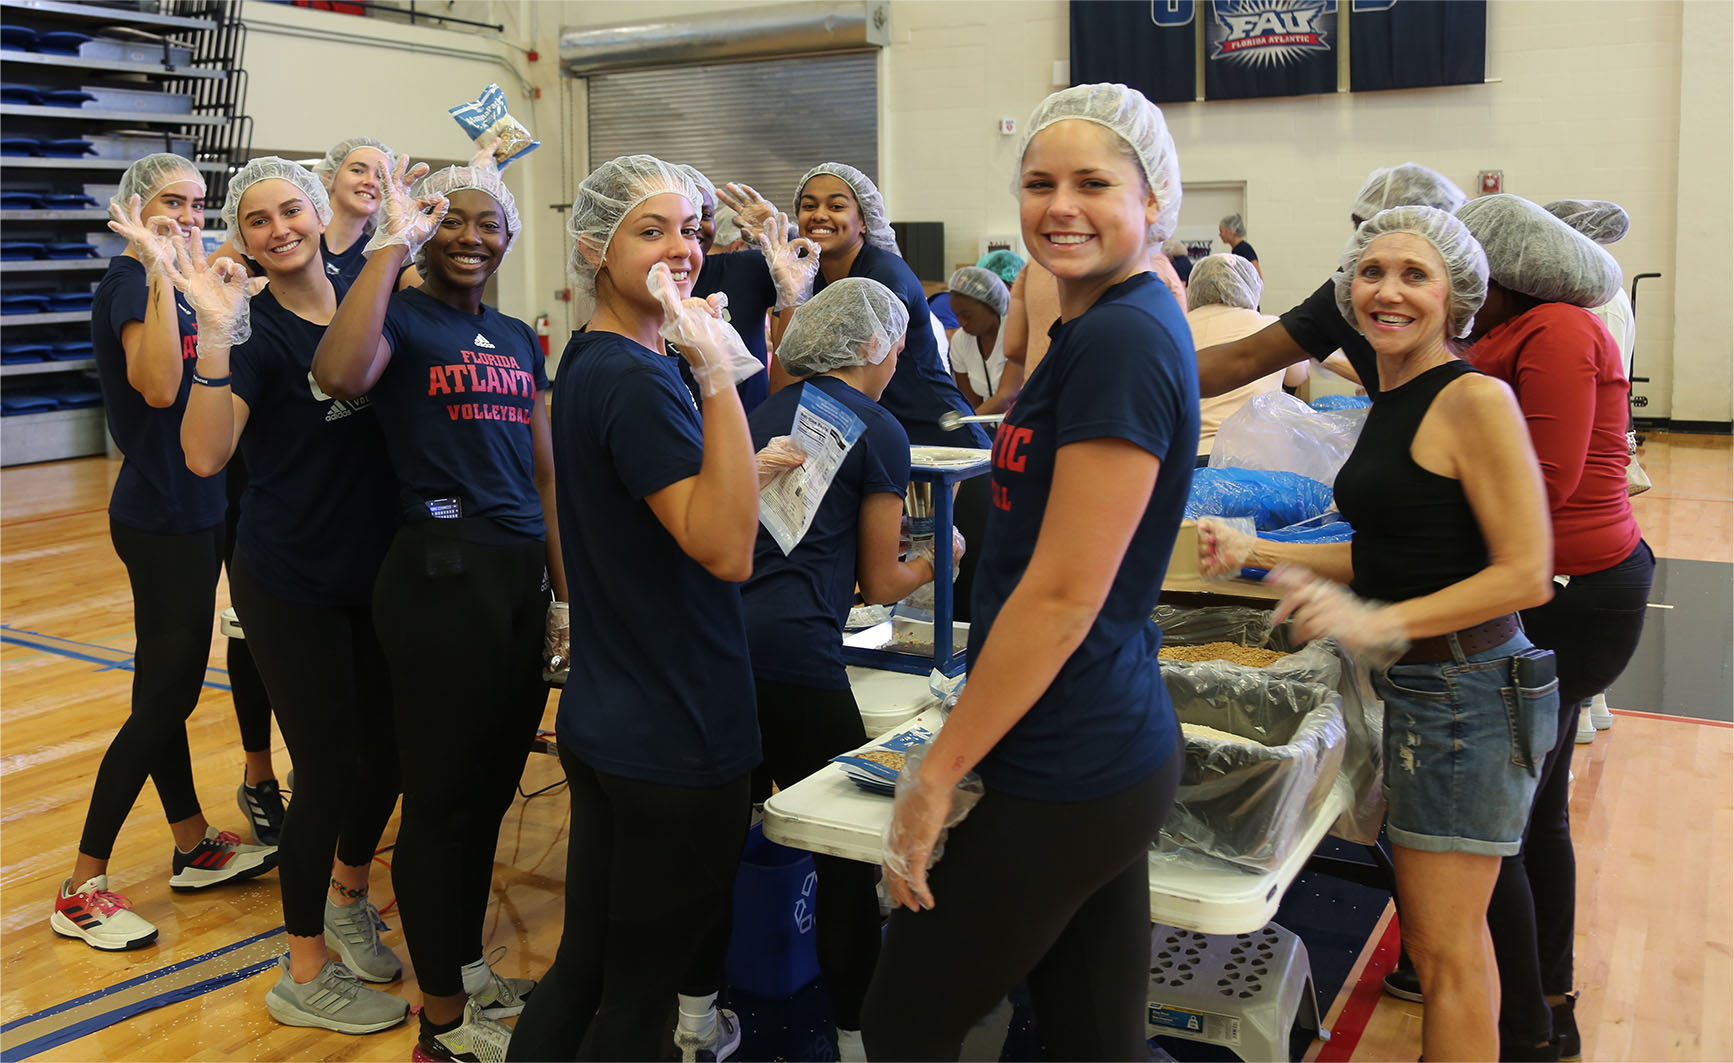 Florida Atlantic University Owls women’s volleyball team was eager to pack meals at FAU Arena